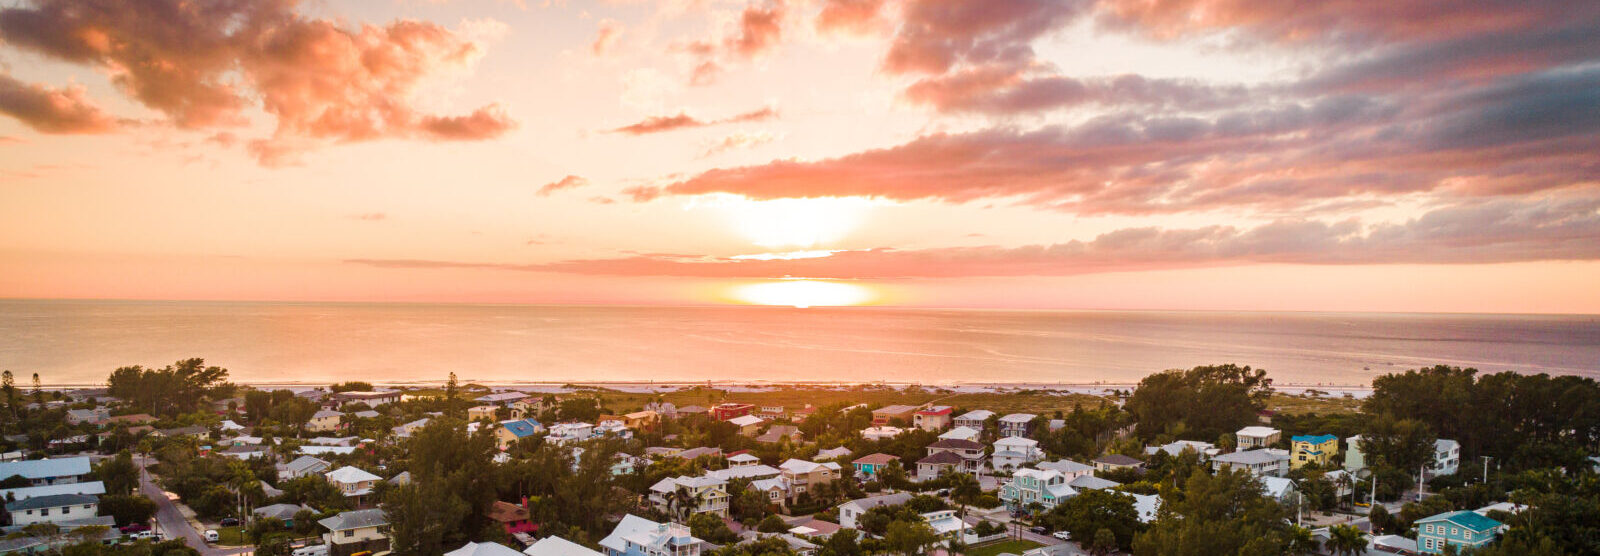 overhead view of an AMI sunset